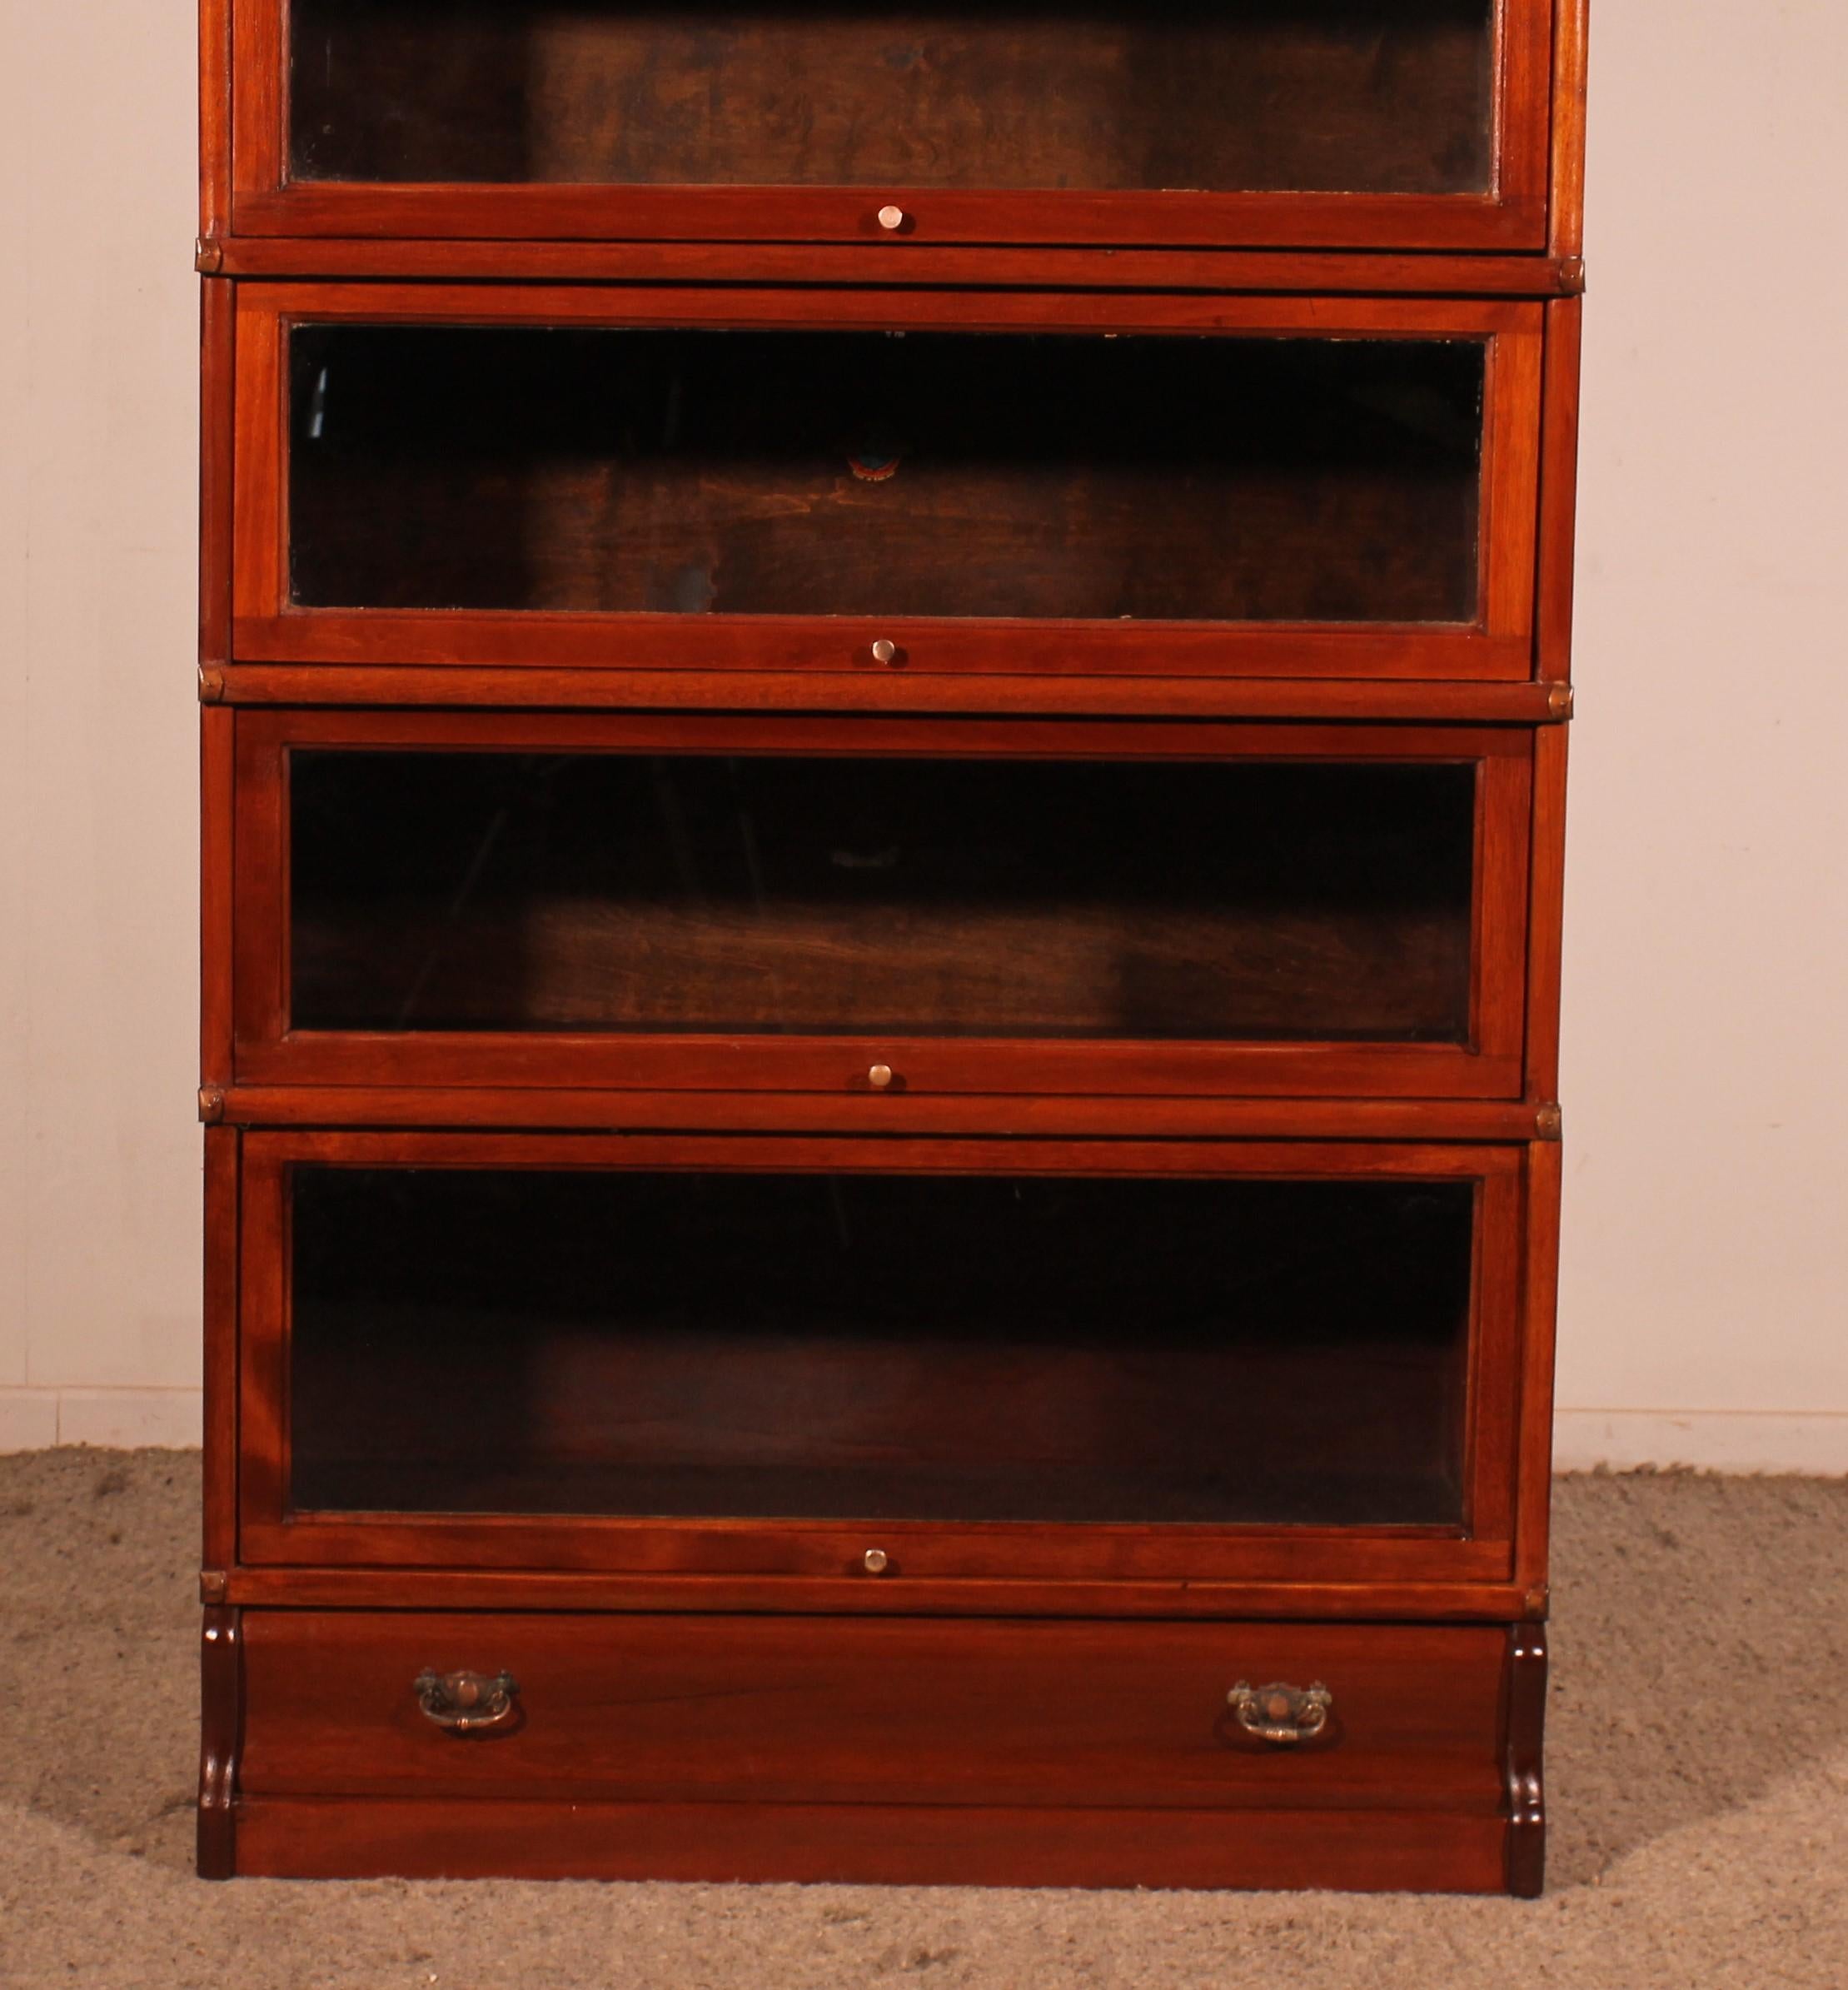 Elegant Globe Wernicke London mahogany bookcase from the end of the 19th century - Early 20th century  from England which has 6 elements
and a drawer in it's base
big model which is composed of a molded base and top and 6 glazed elements

The